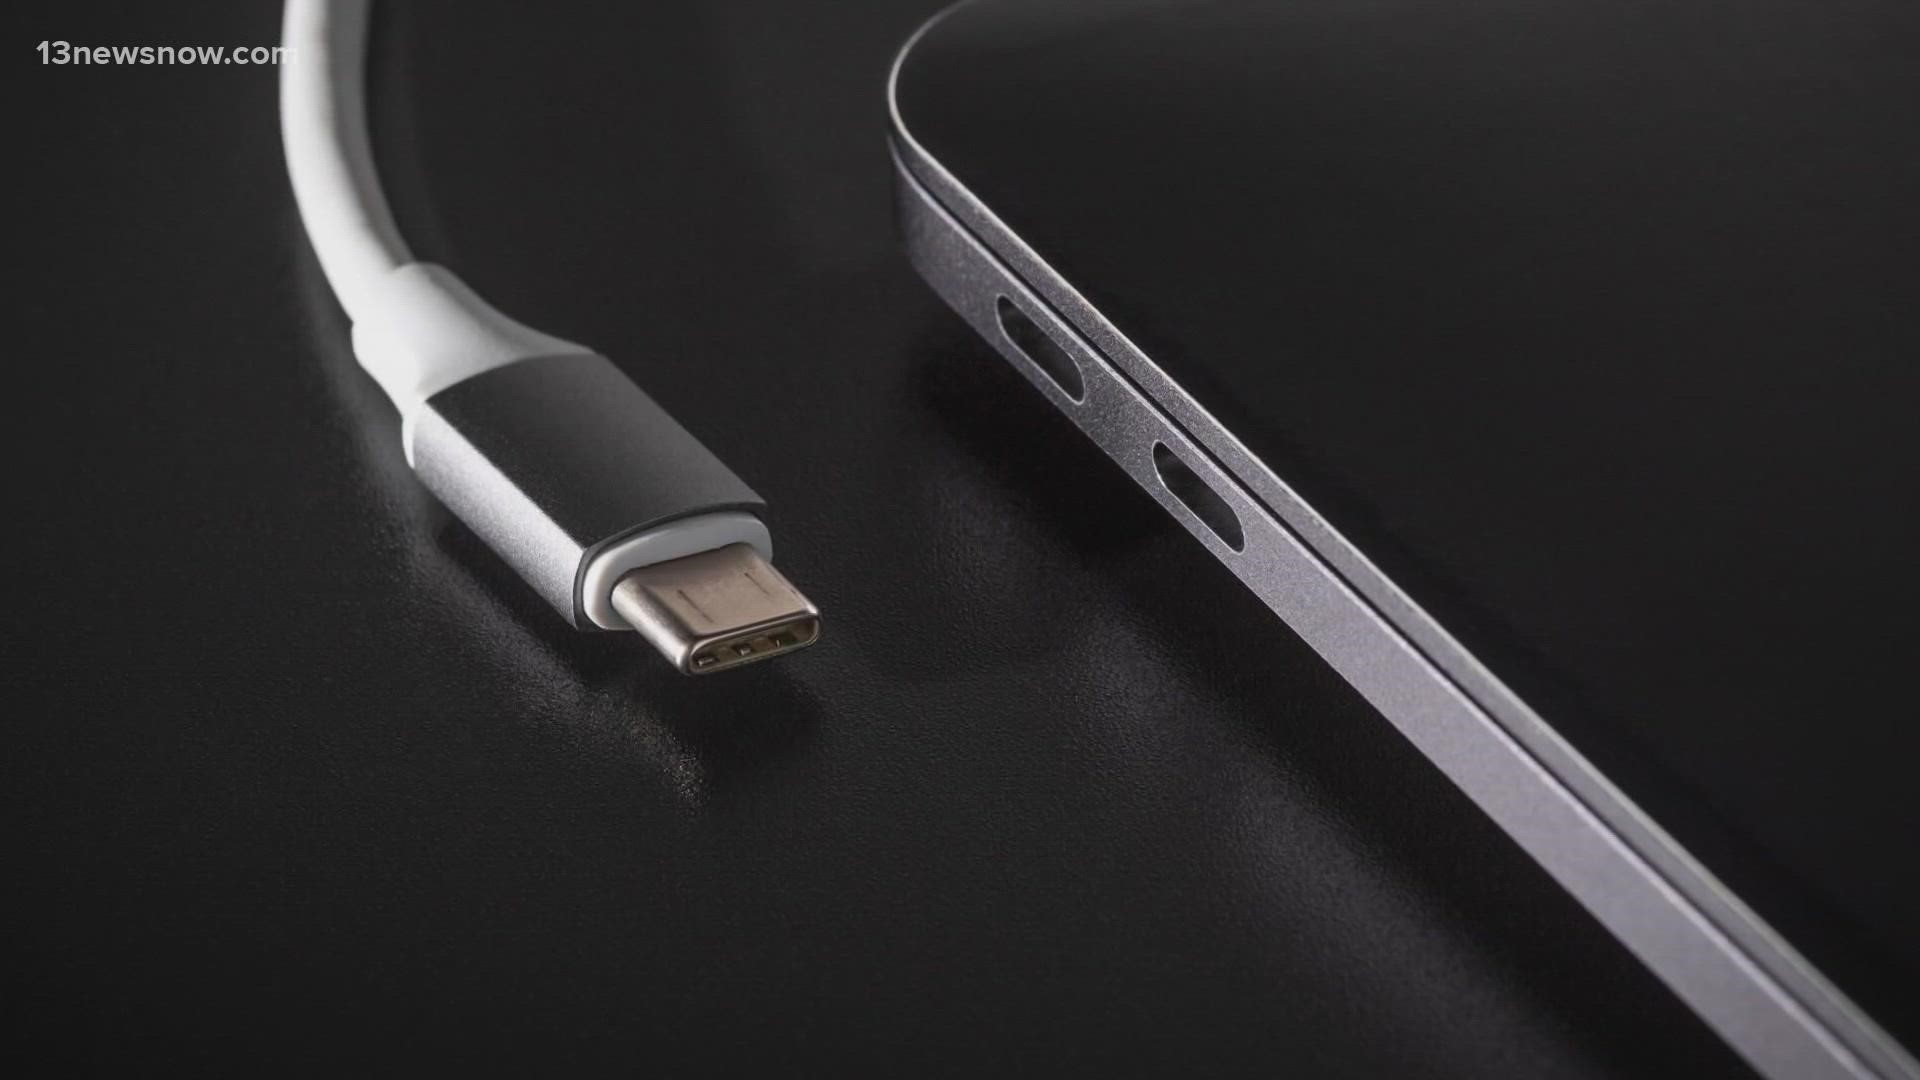 Add it to the list of things you could soon have to pay up for: new chargers for everything from your phone to your laptop!